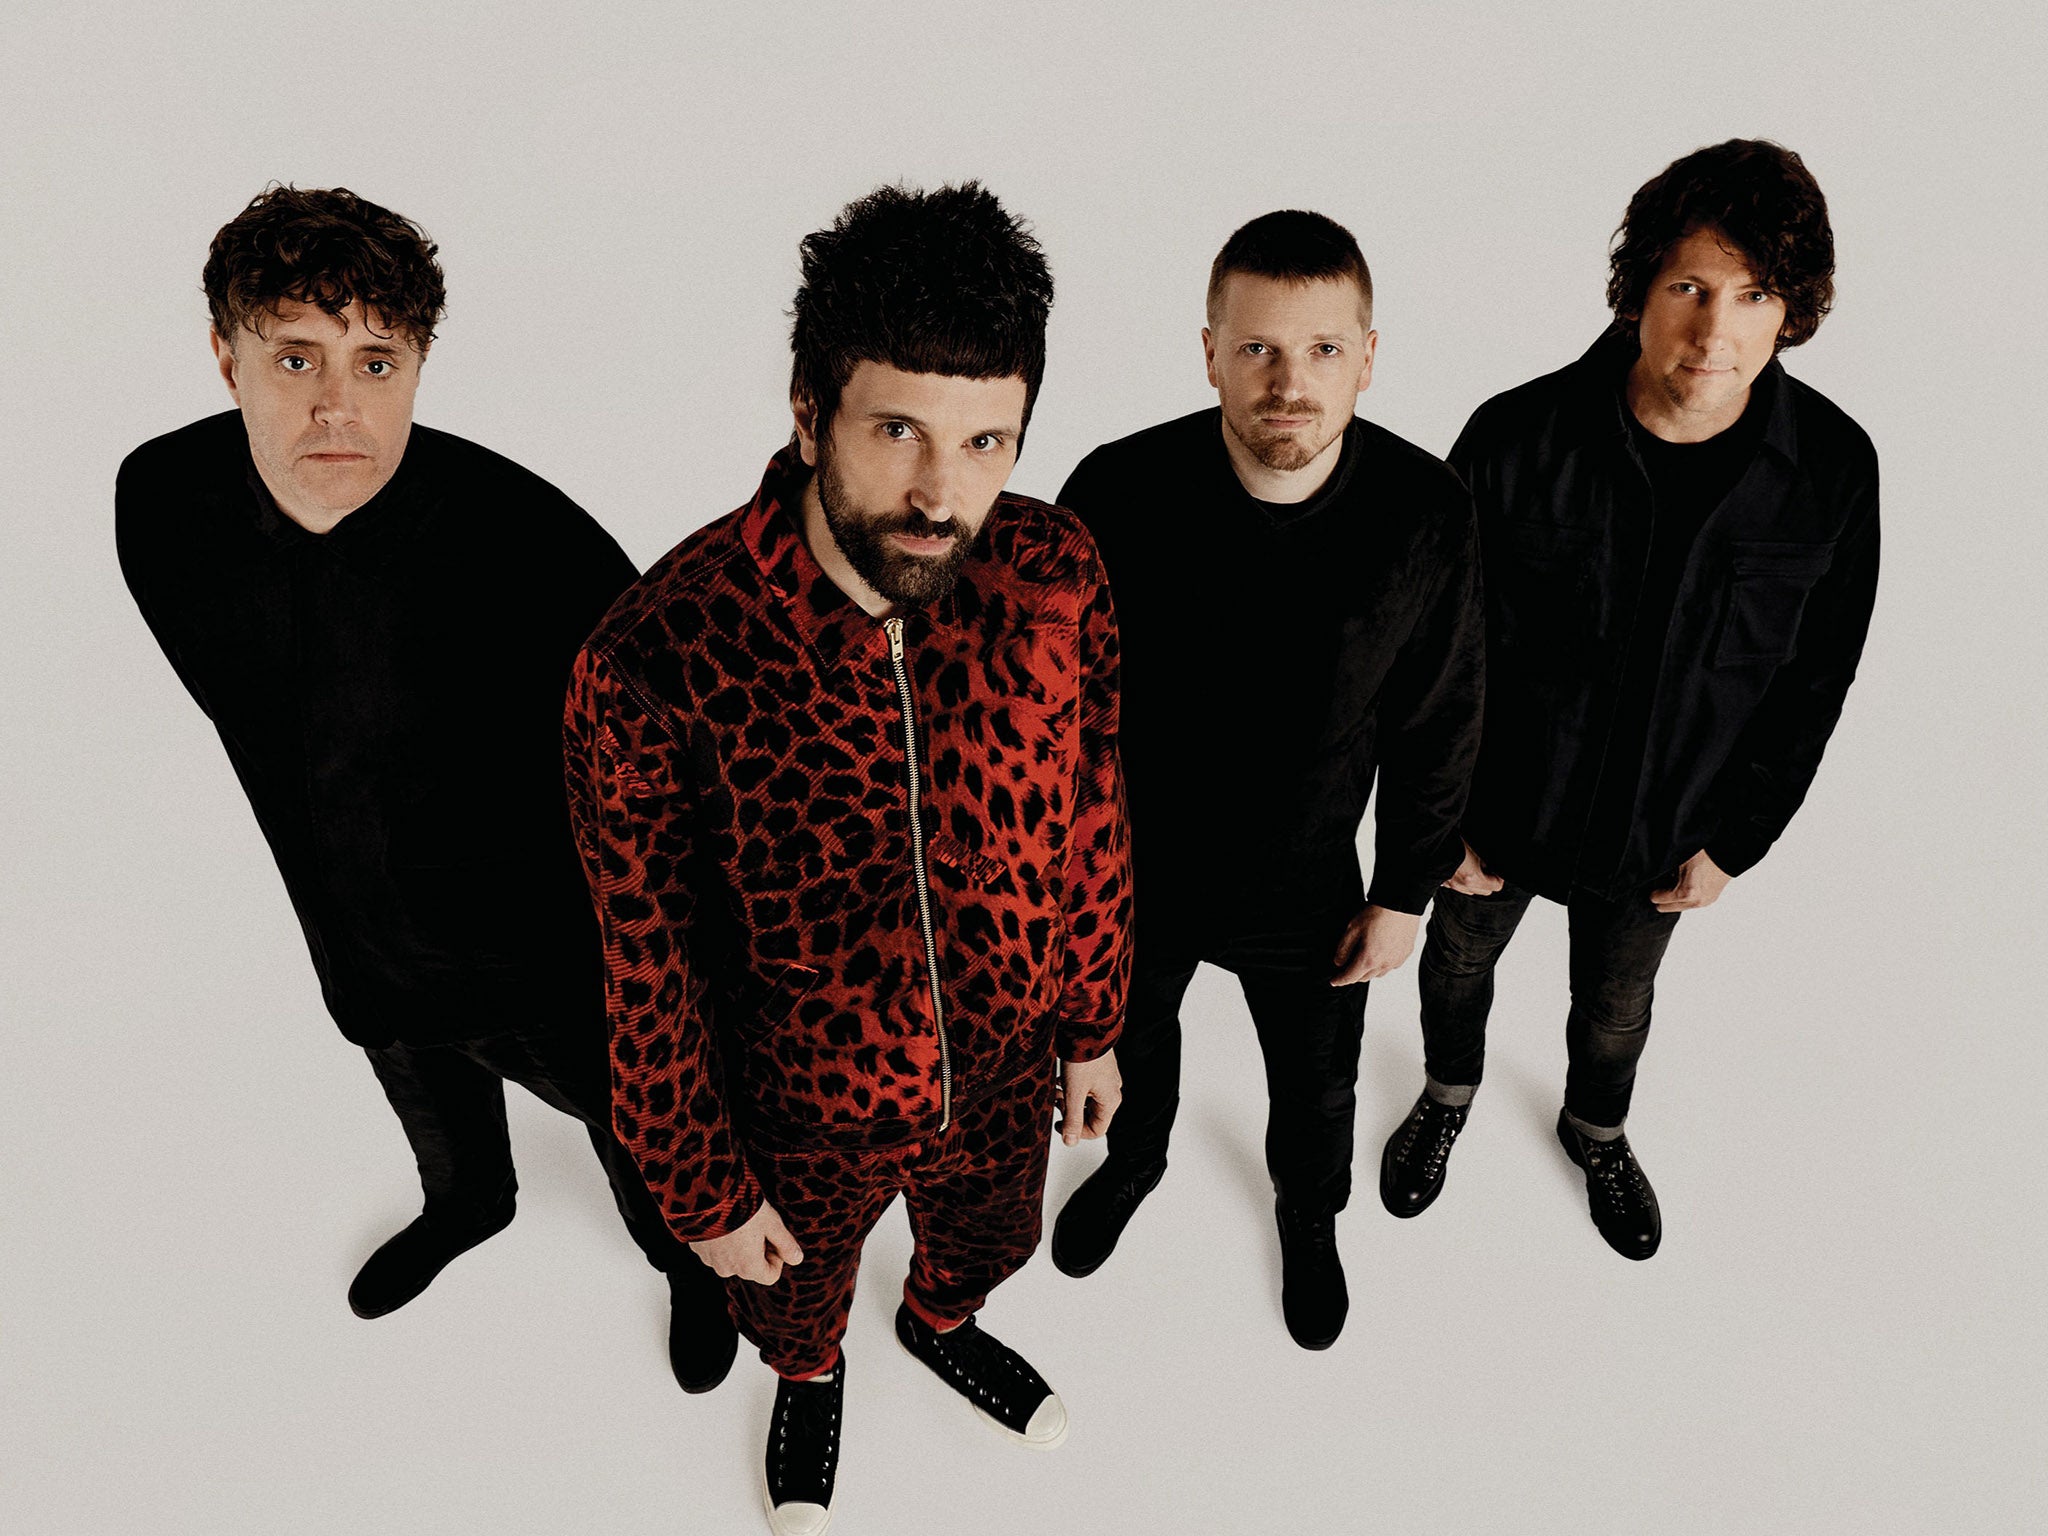 Kasabian are back on impressively punchy and experimental form